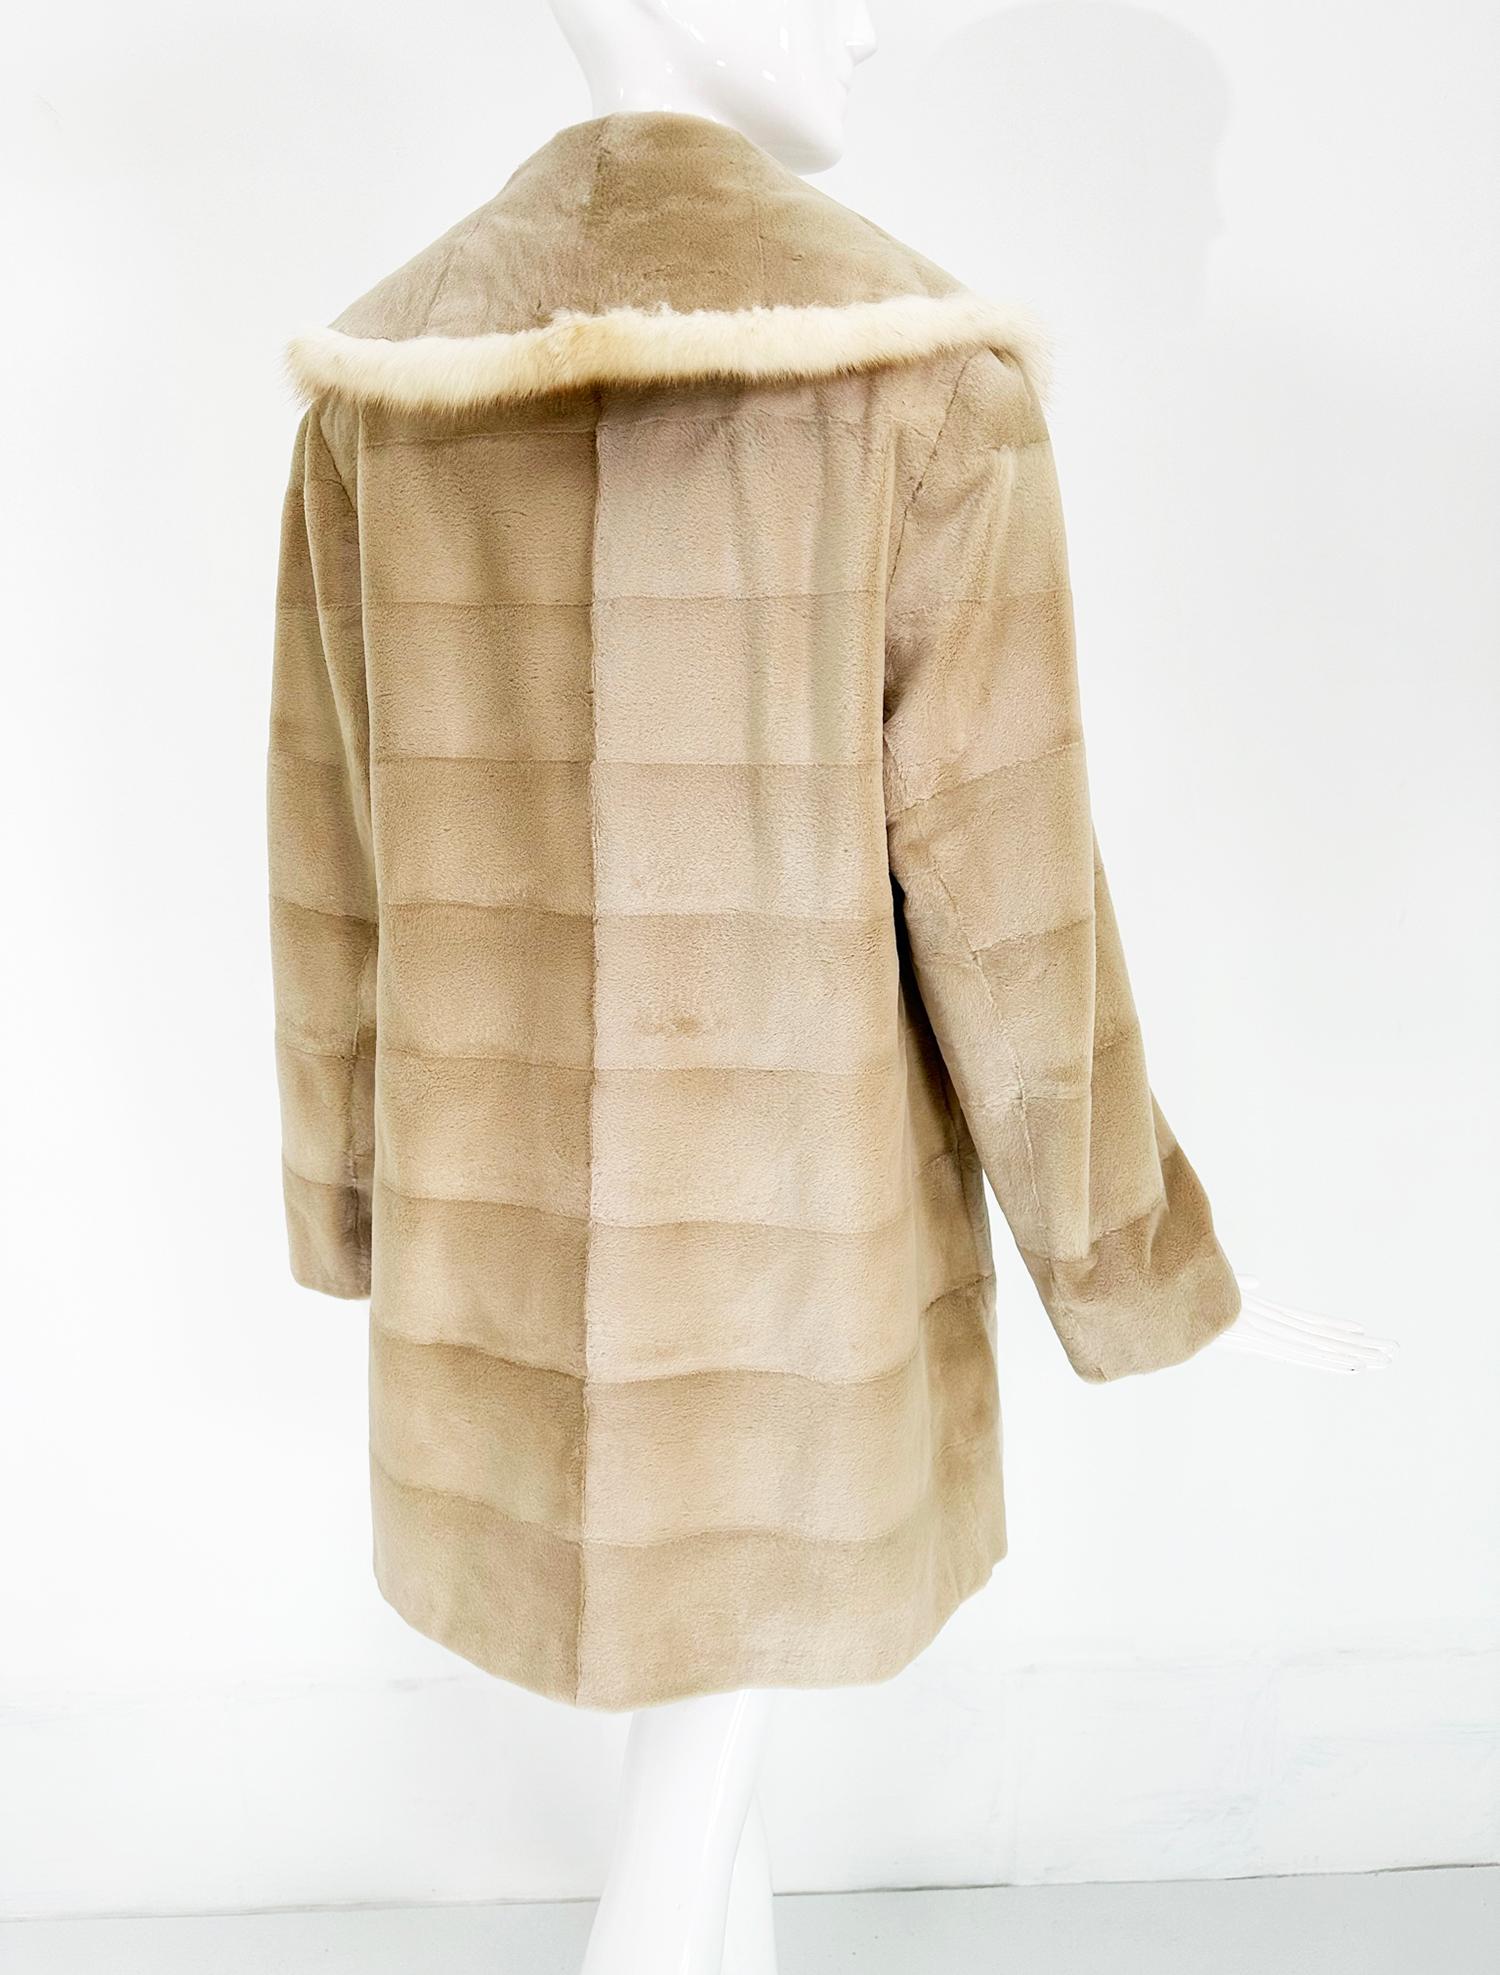 Champagne Blond Sheared Mink Reversible Jacket With Full Shawl Collar  For Sale 2